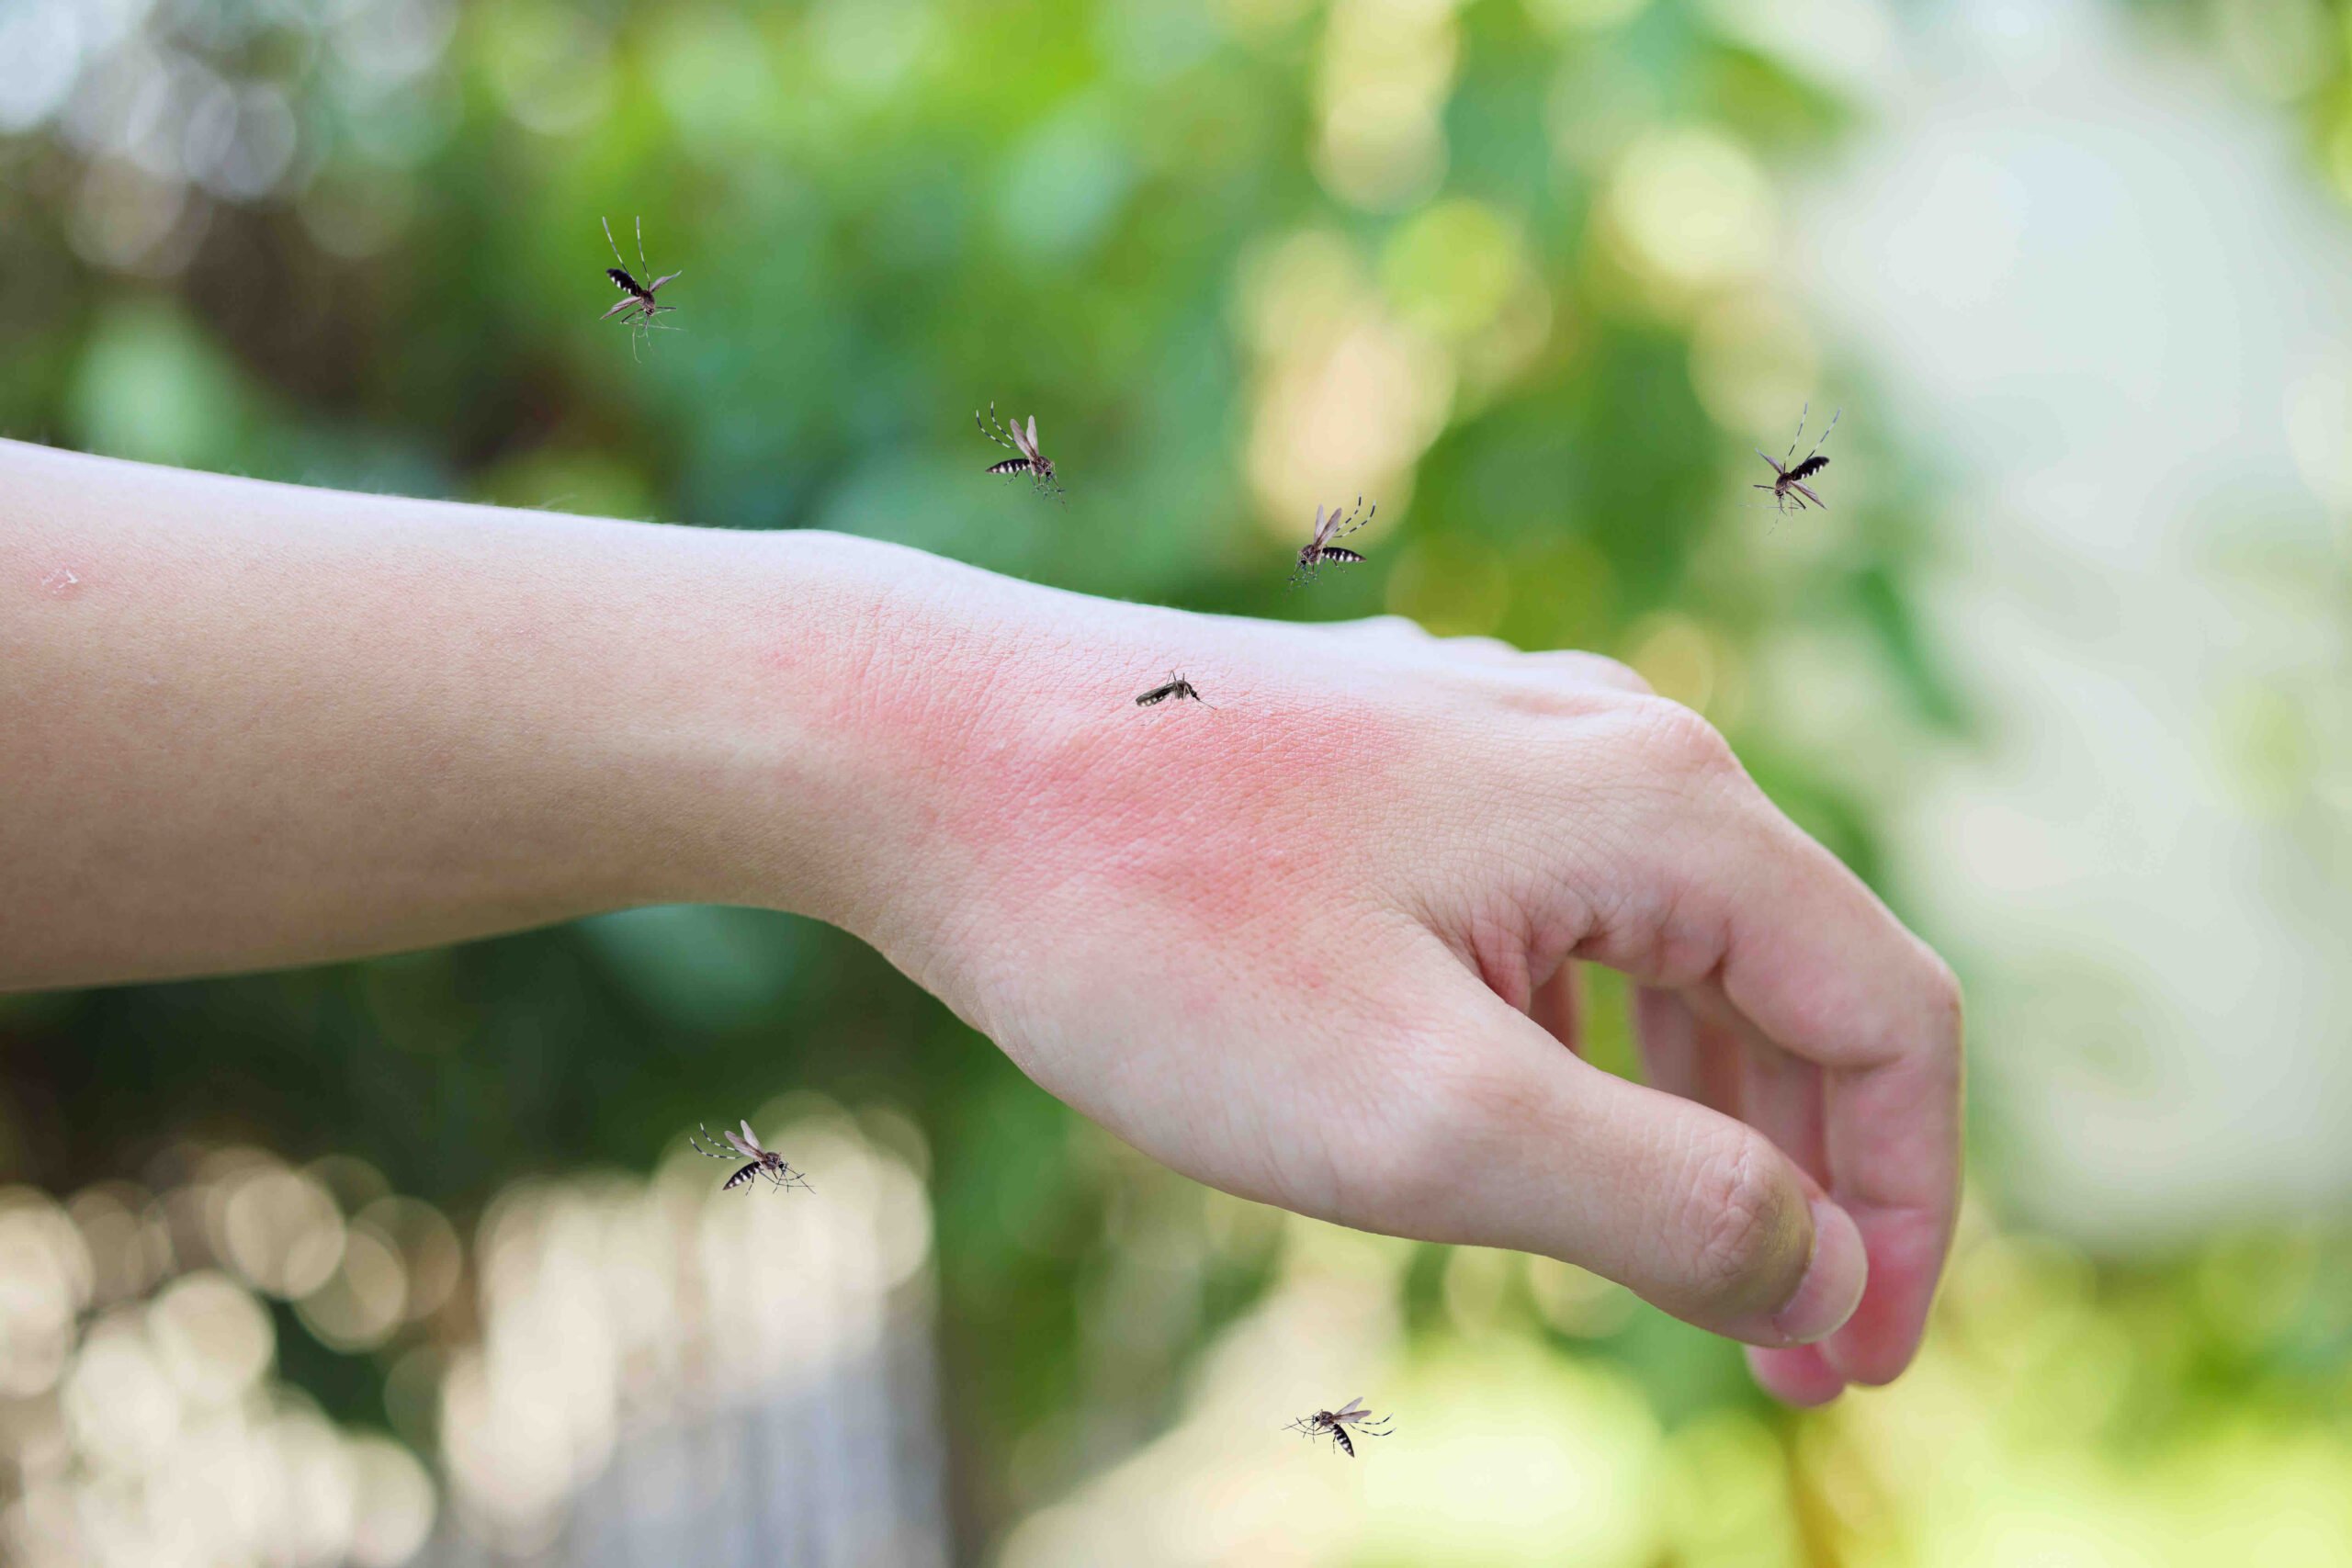 infected insect bite treatment - streatham at Westbury Chemist